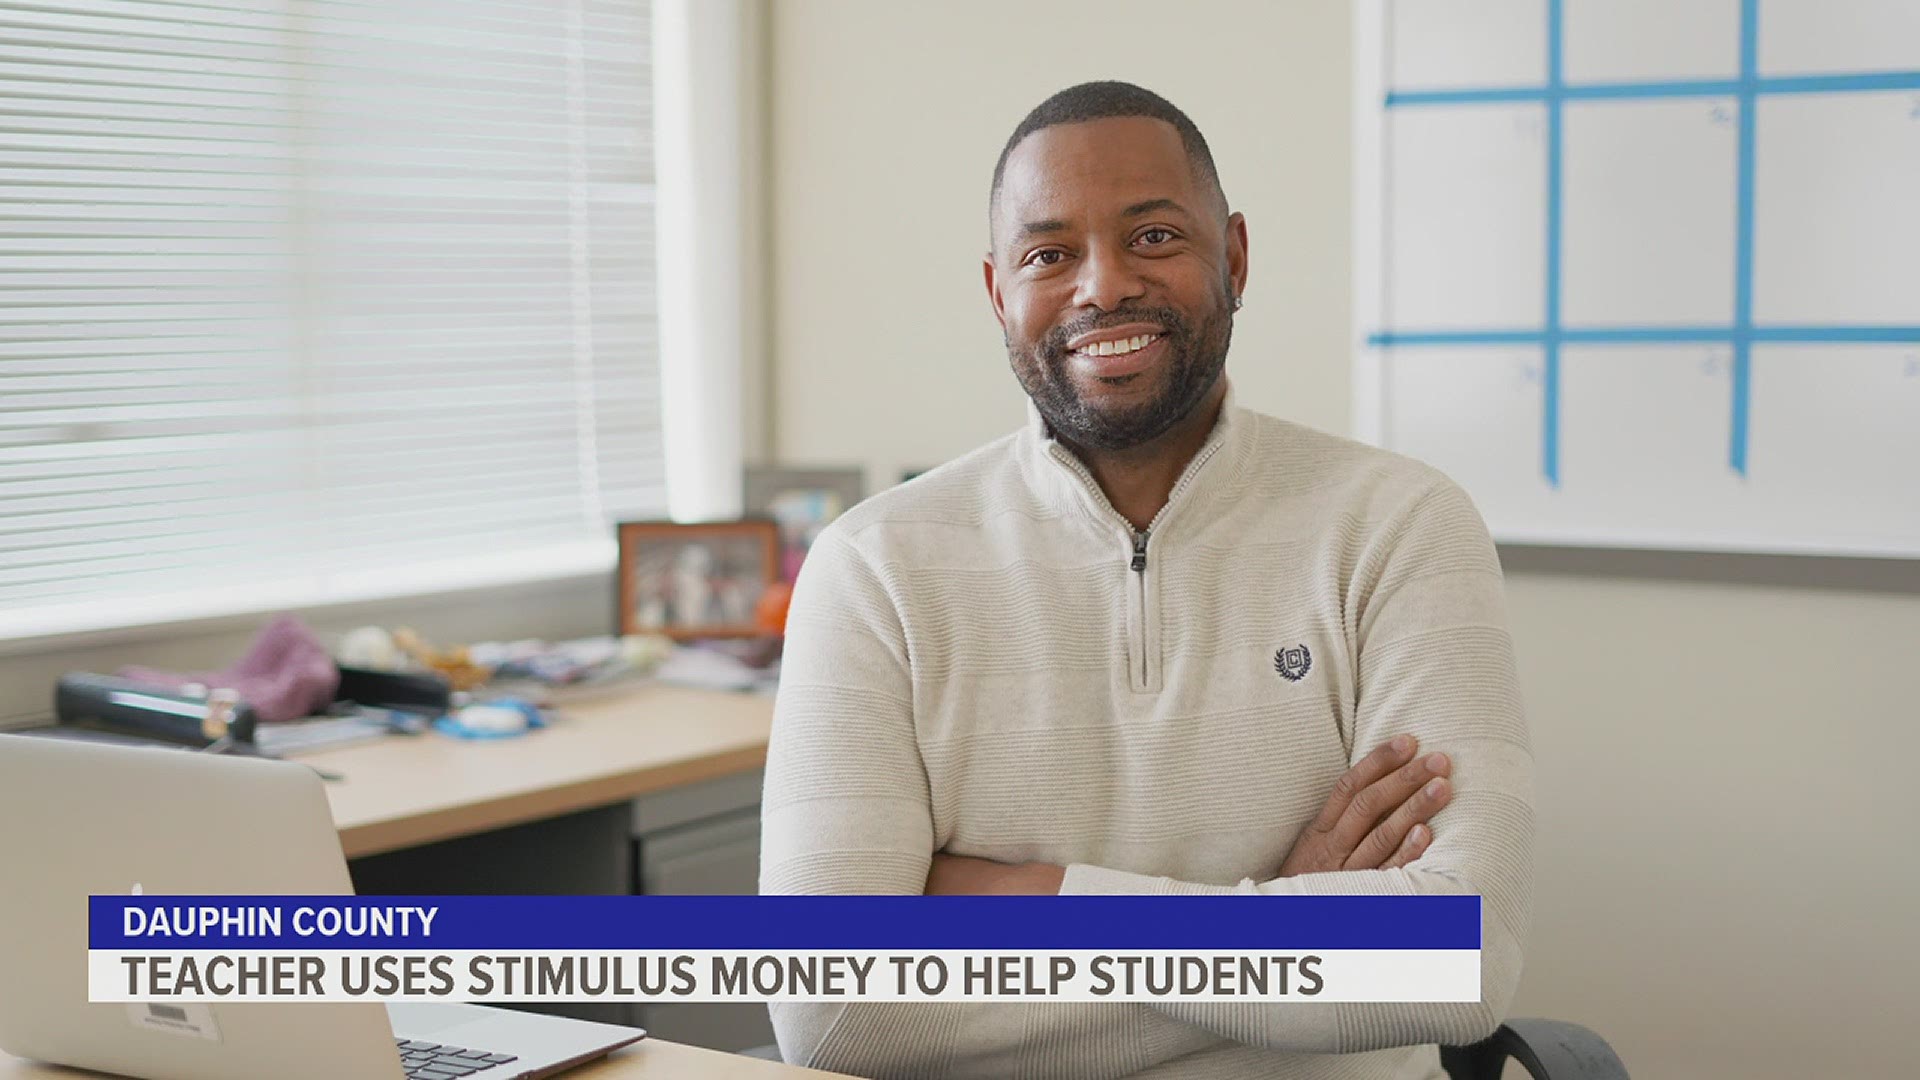 Matthew Pierce used his stimulus money to buy Uber Eats gift cards for his students and their families